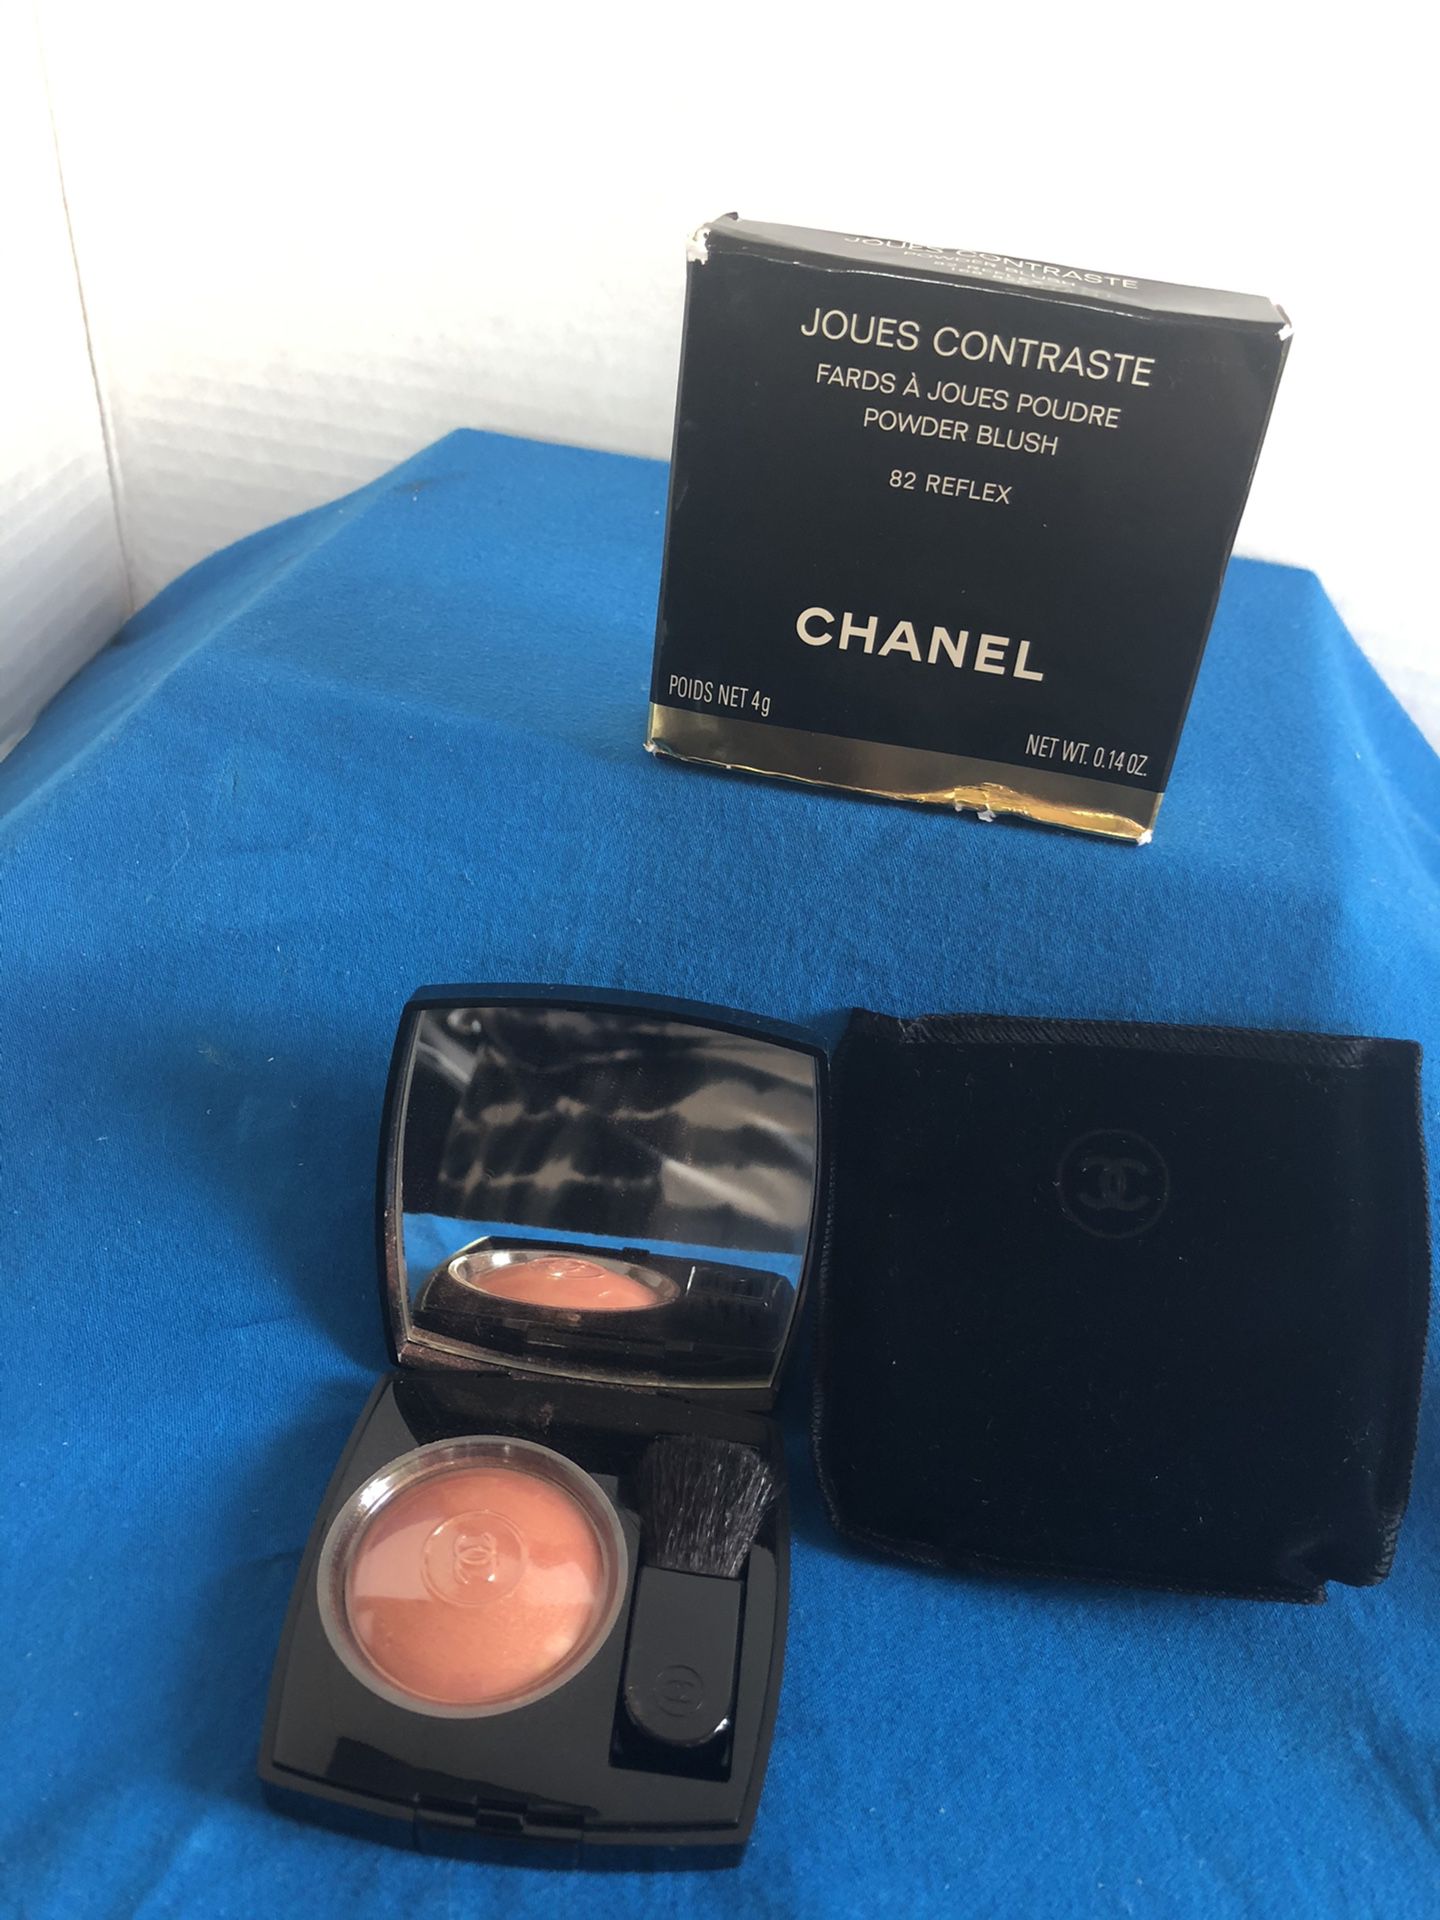 Rationel Mary Med andre band Chanel #82 Reflex powder blush for Sale in Tamarac, FL - OfferUp